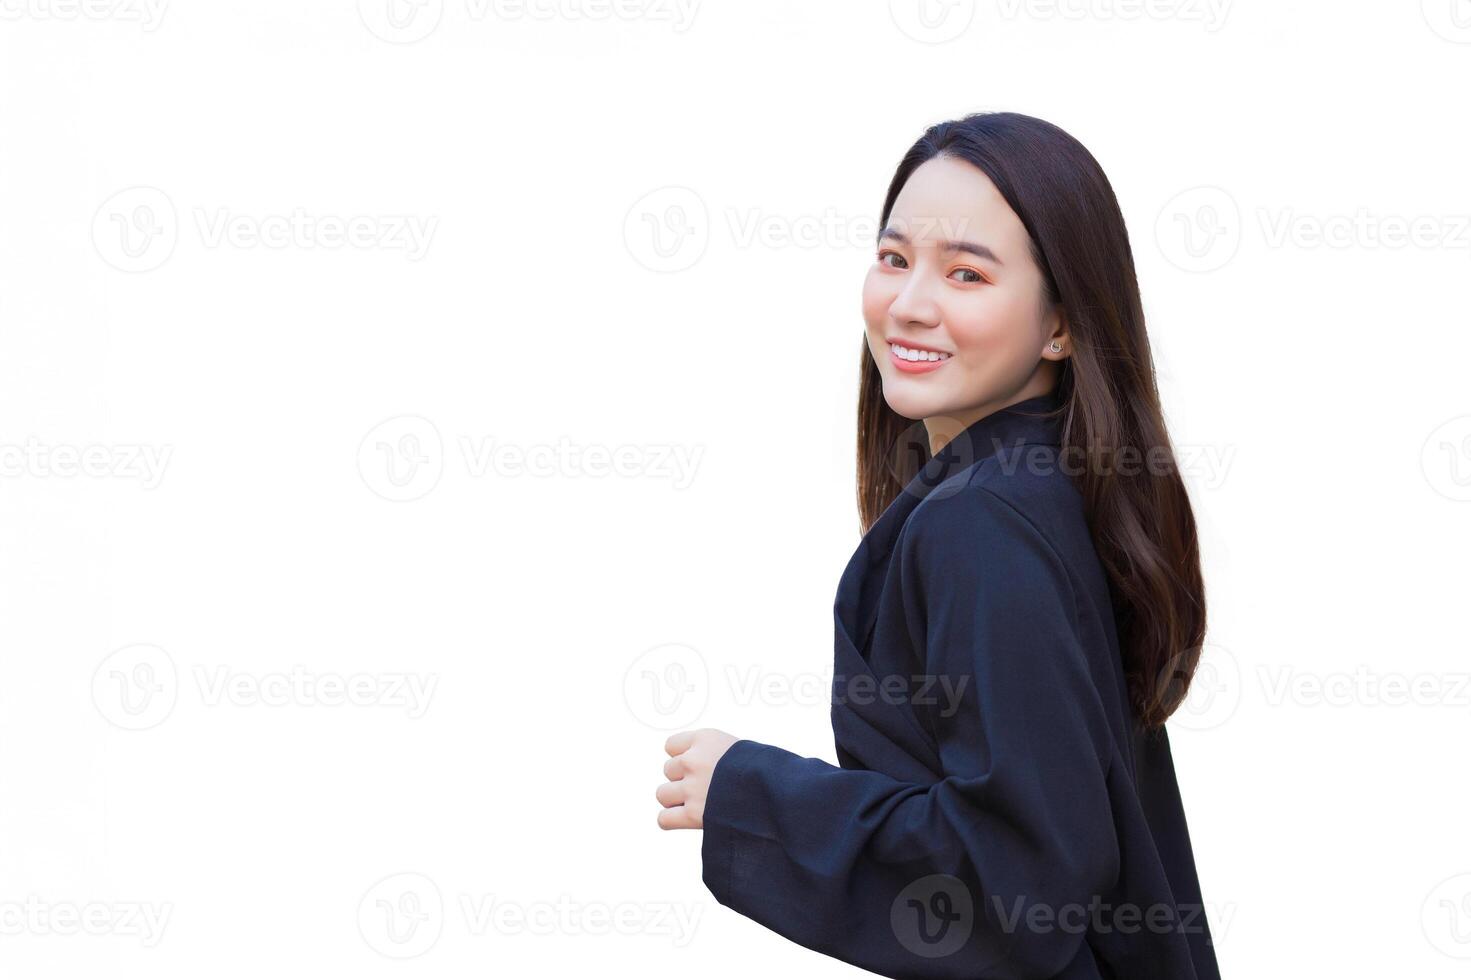 This image portrays confident professional Asian woman wearing blue blazer. She appears mature and business oriented while isolated white background. photo